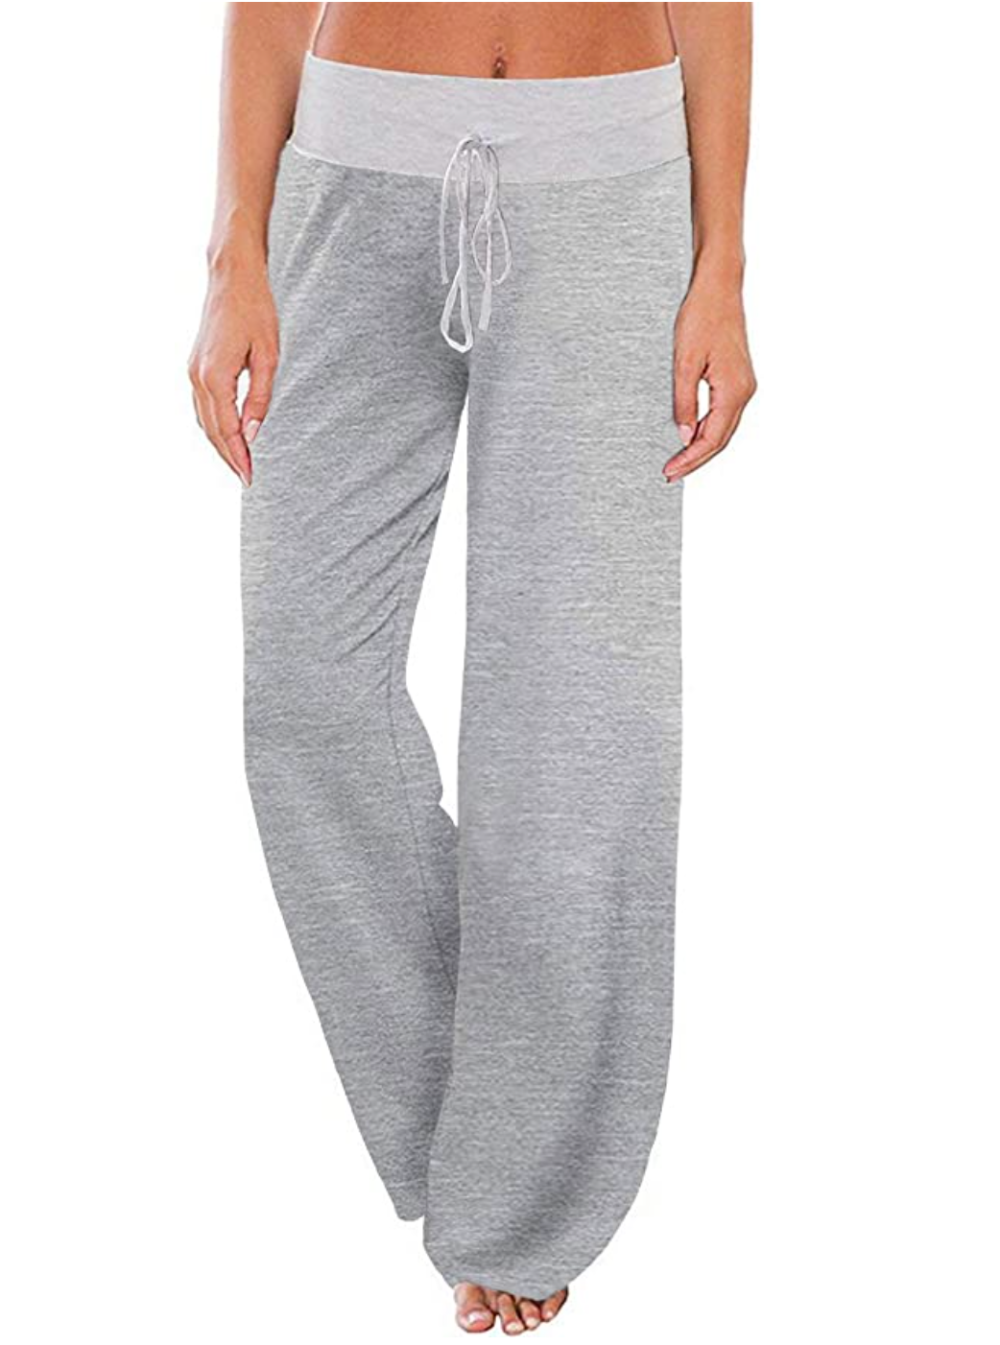 AMiERY Simple Lounge Pants Hit So Many No. 1 Marks on Amazon | Us Weekly